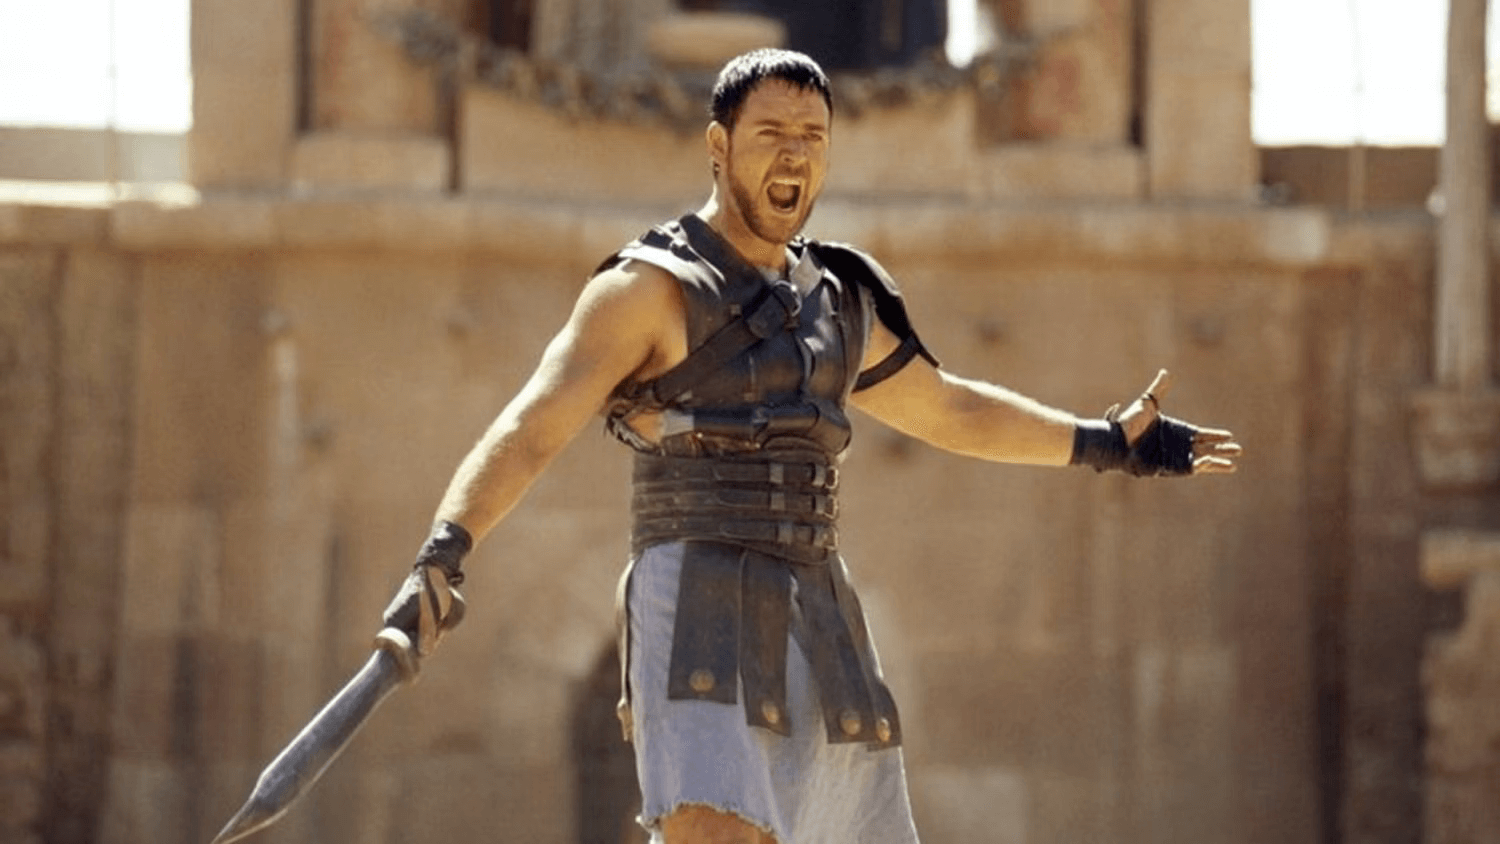 Russell Crowe in Ridley Scott's Gladiator